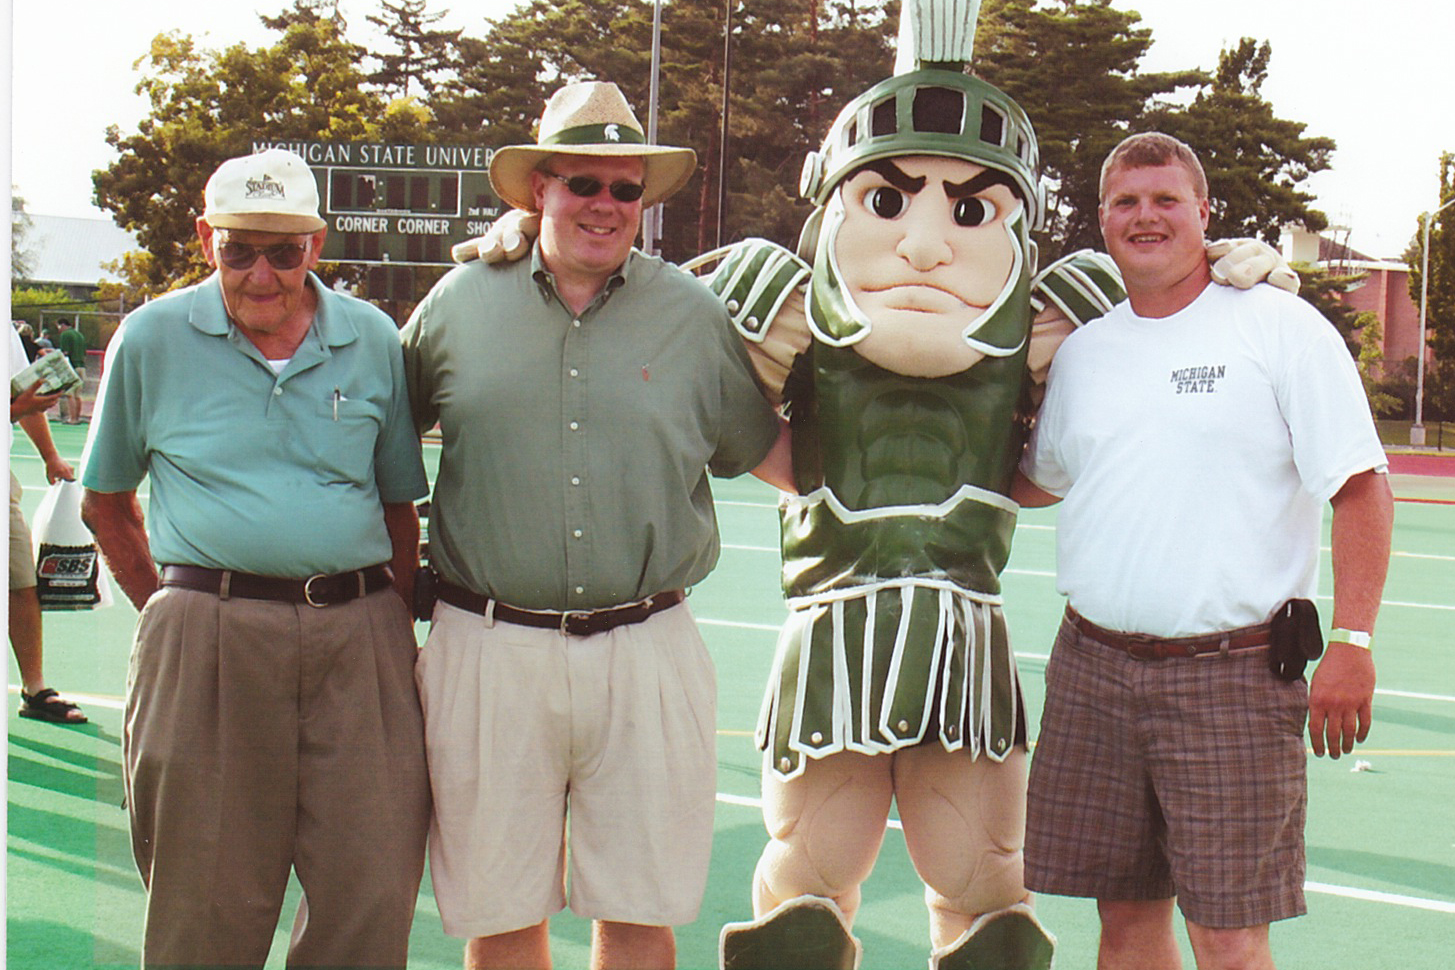 Left to right: Ed Carpenter, Scott Bigelow, Sparty and Frank Hull.